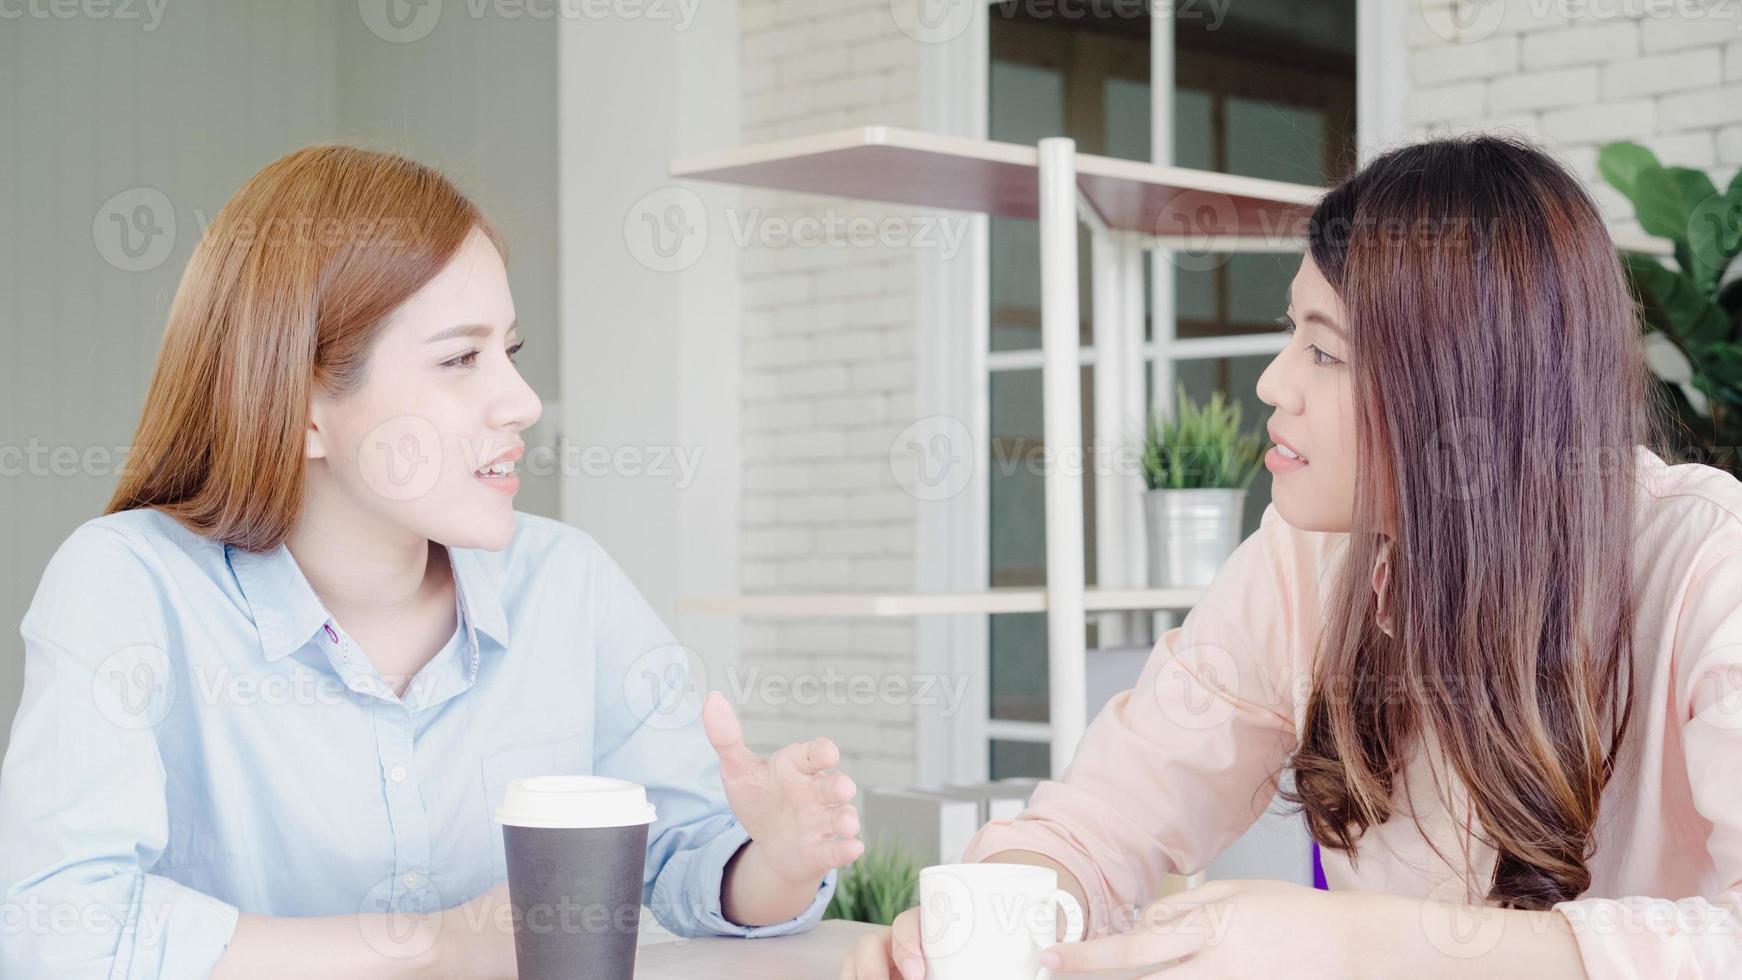 Asian business women enjoying drinking warm coffee, discuss about work and chit chat gossip while relax working in office. Smart business women social meeting concept. photo